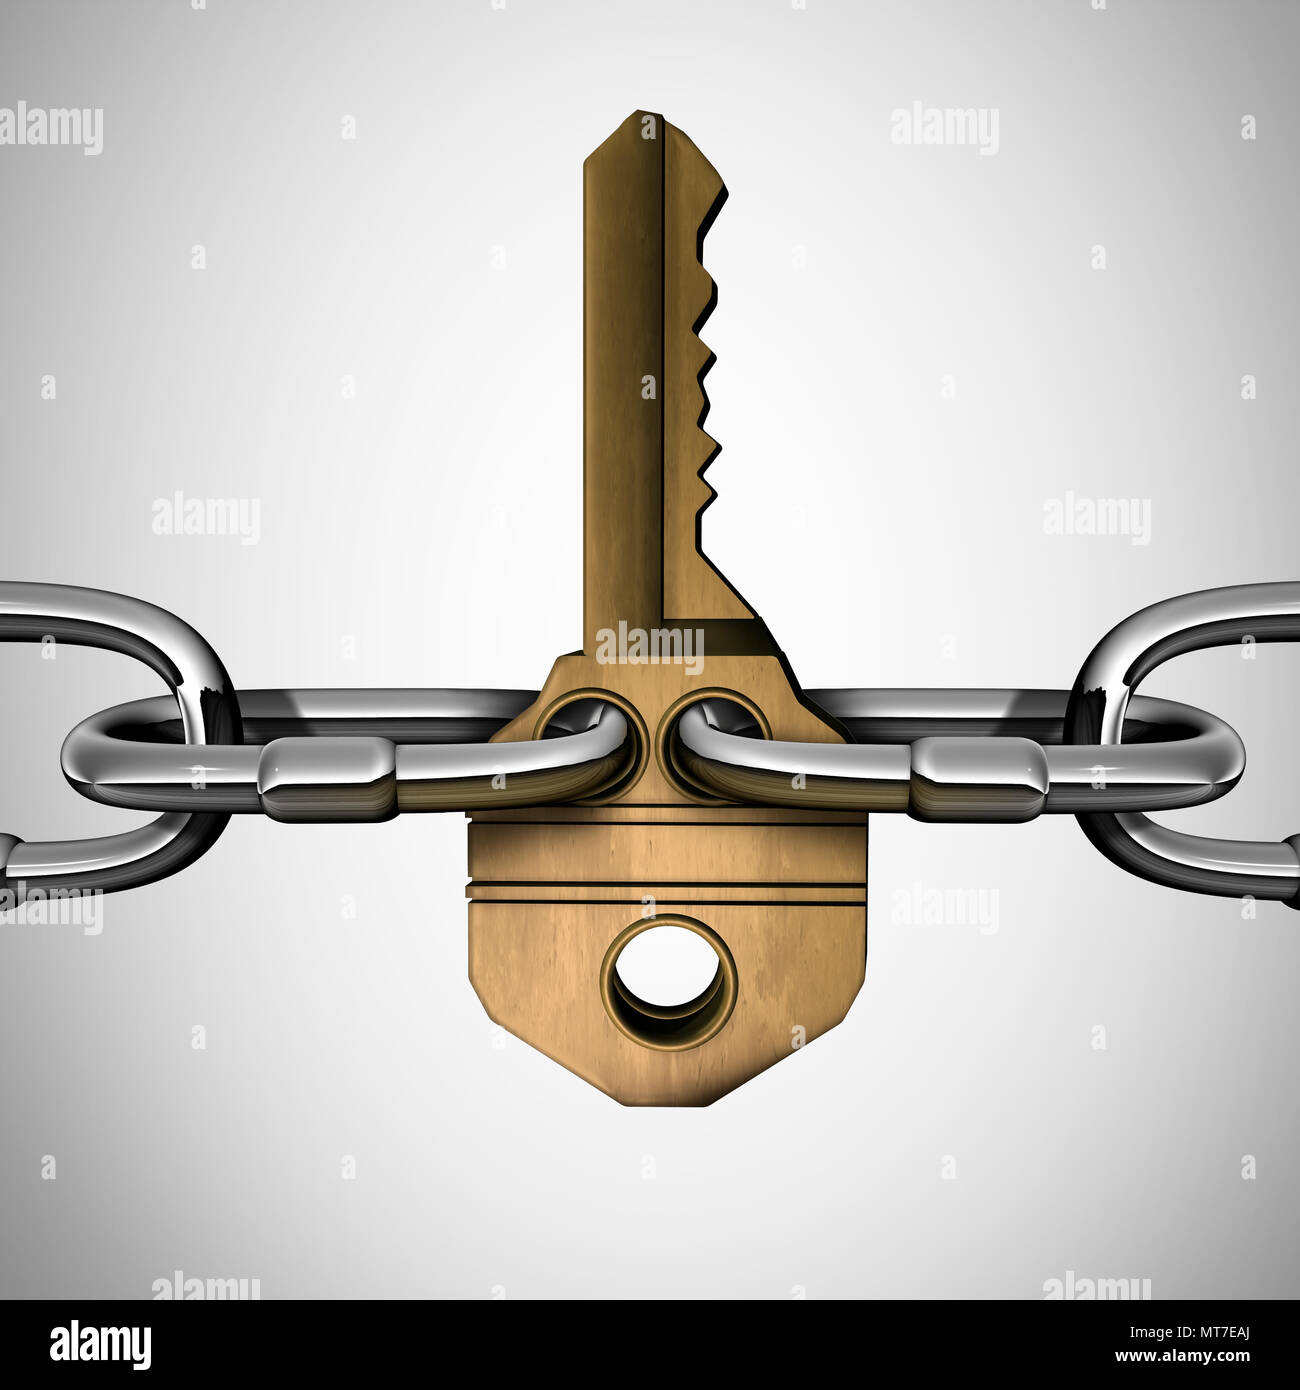 Key chain concept success idea as links attached with a giant golden brass security object acting as a strong network connection. Stock Photo